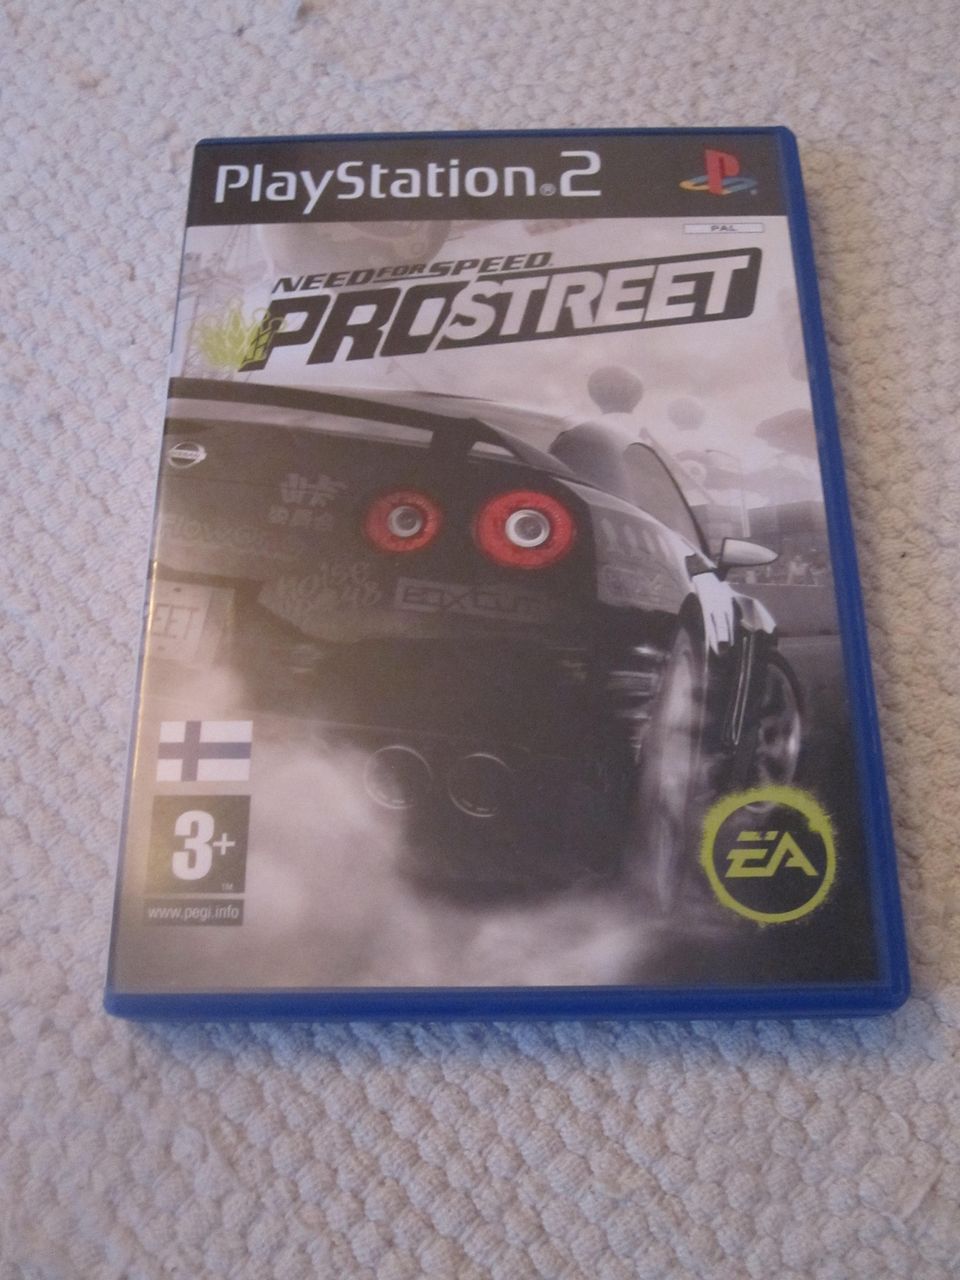 Playstation 2 Need for speed Prostreet